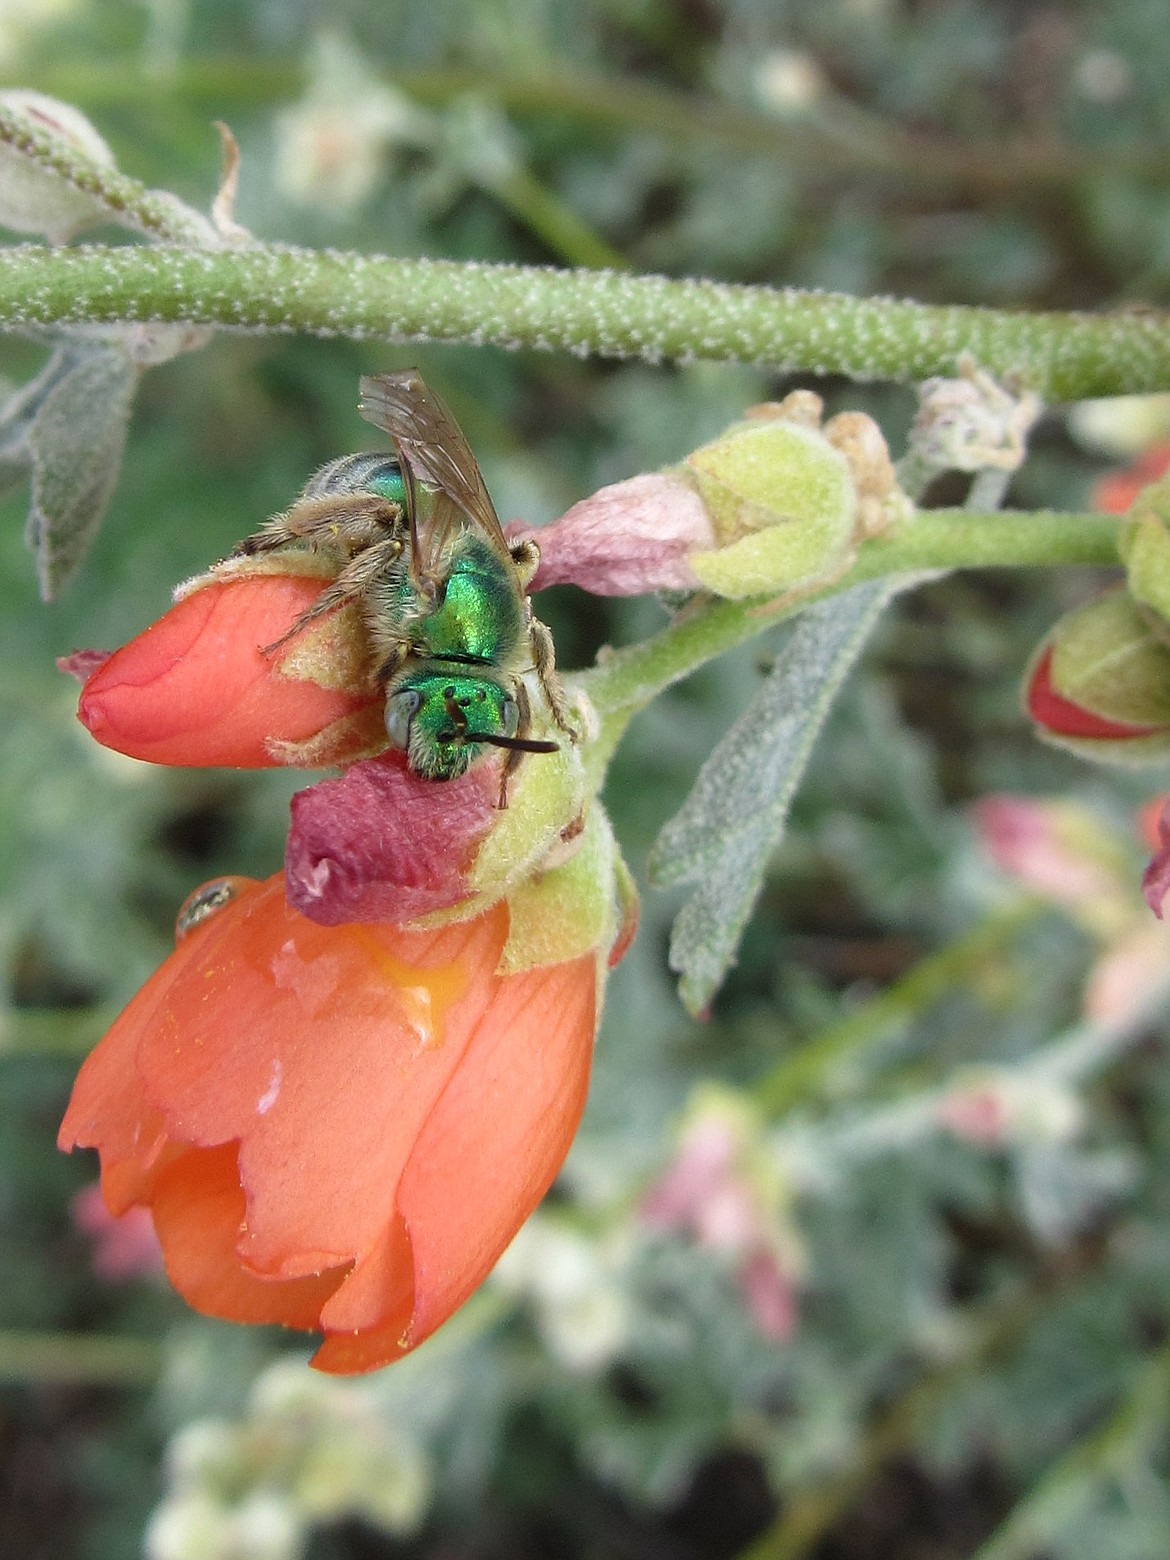 A green sweat bee shimmers as it forages on a red globemallow flower.